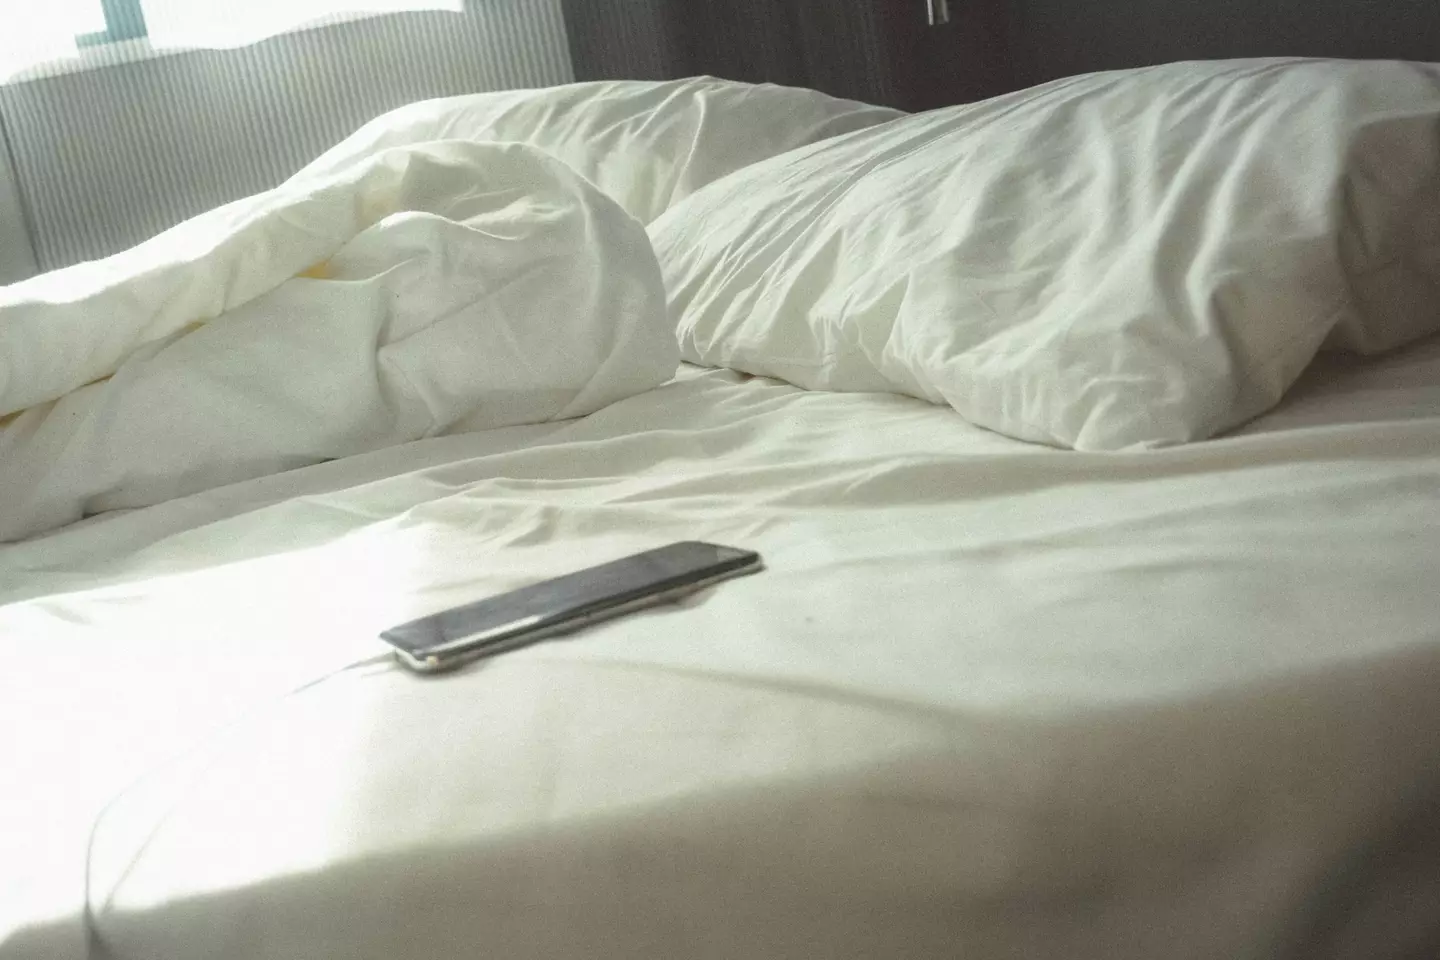 Apple have issued a warning to iPhone users who charge their phones under their pillows as they sleep.